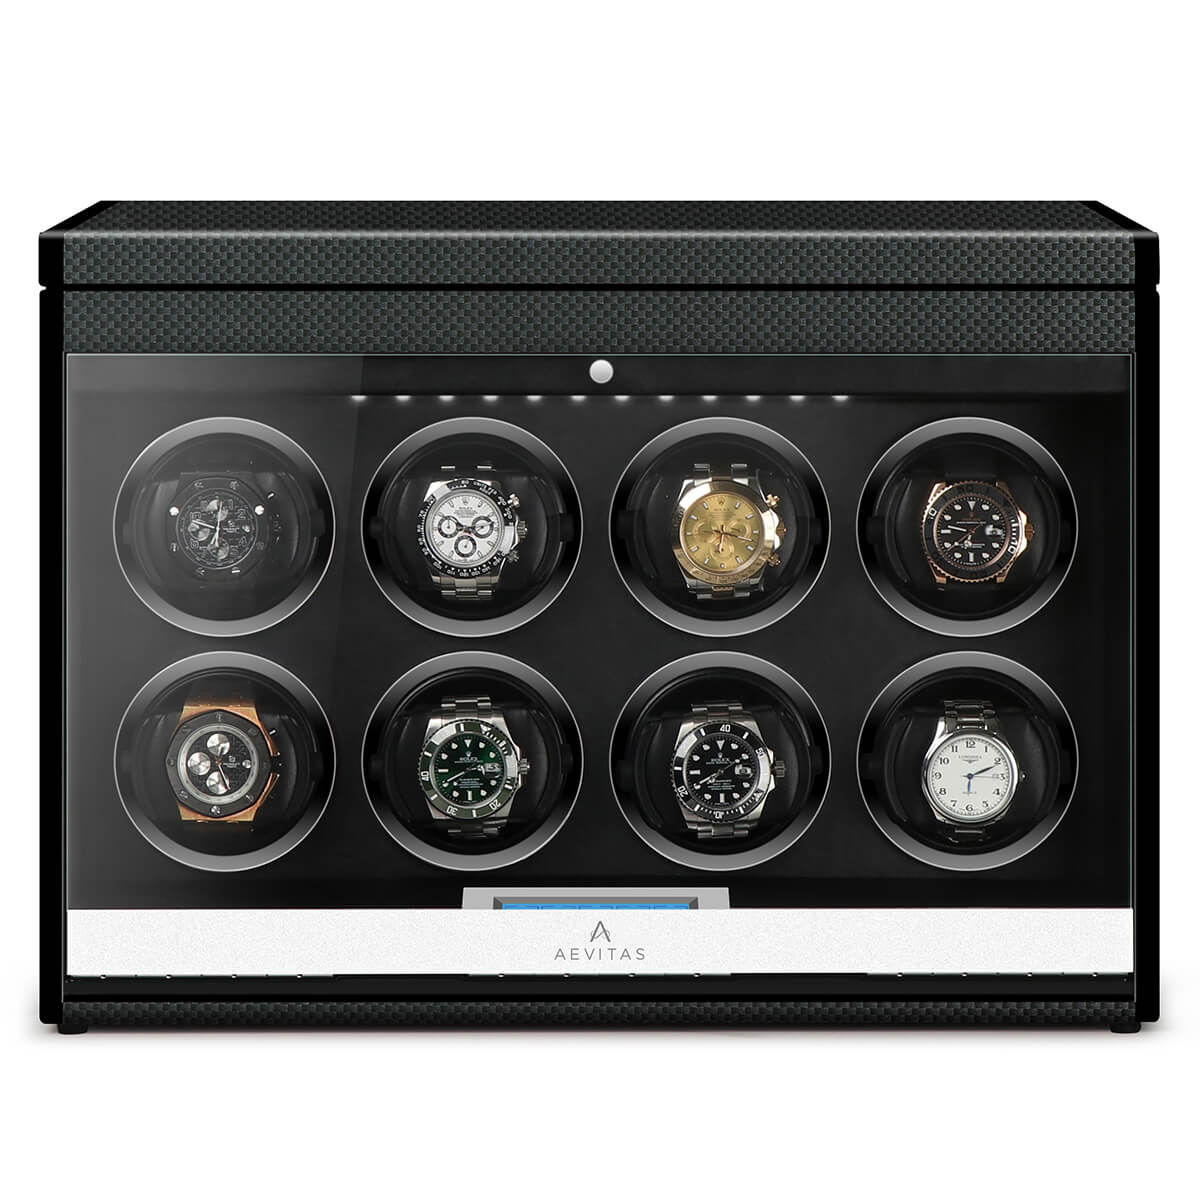 8 Watch Winders for Automatic Watches by Aevitas UK